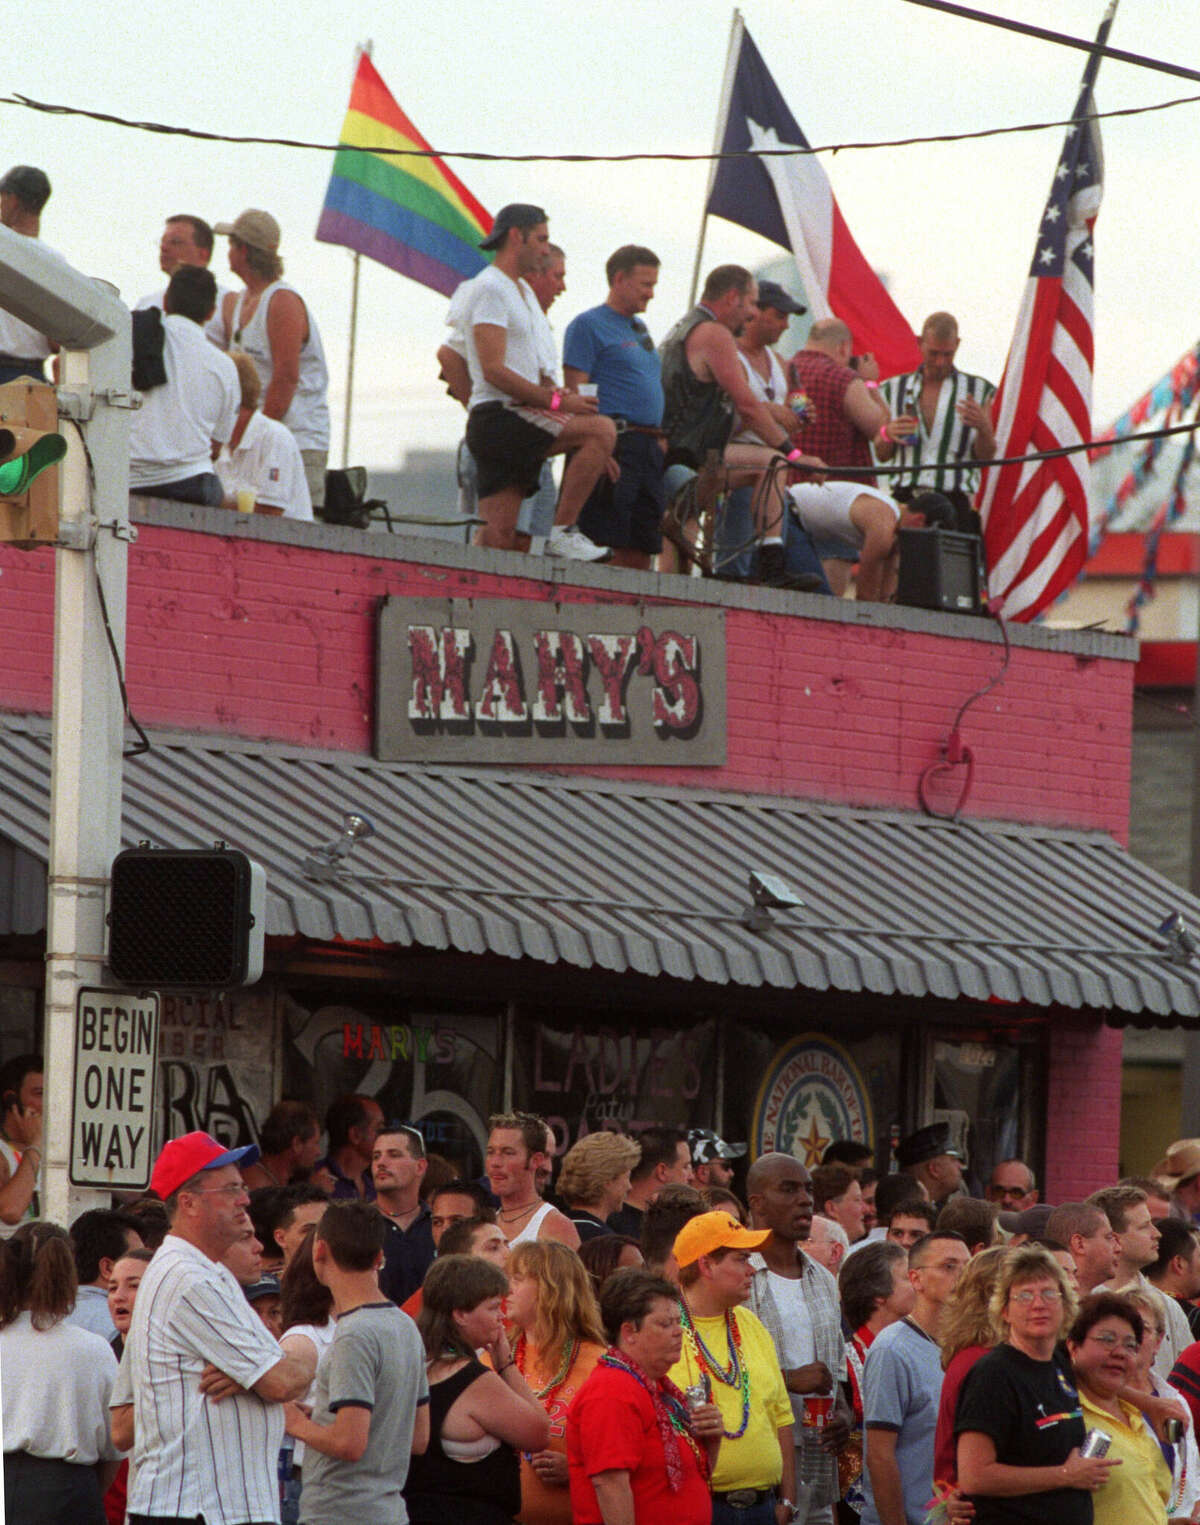 Parade goers crowd the sidewalk and roof of Mary's, a landmark gay bar in Houston's Montrose neighborhood.